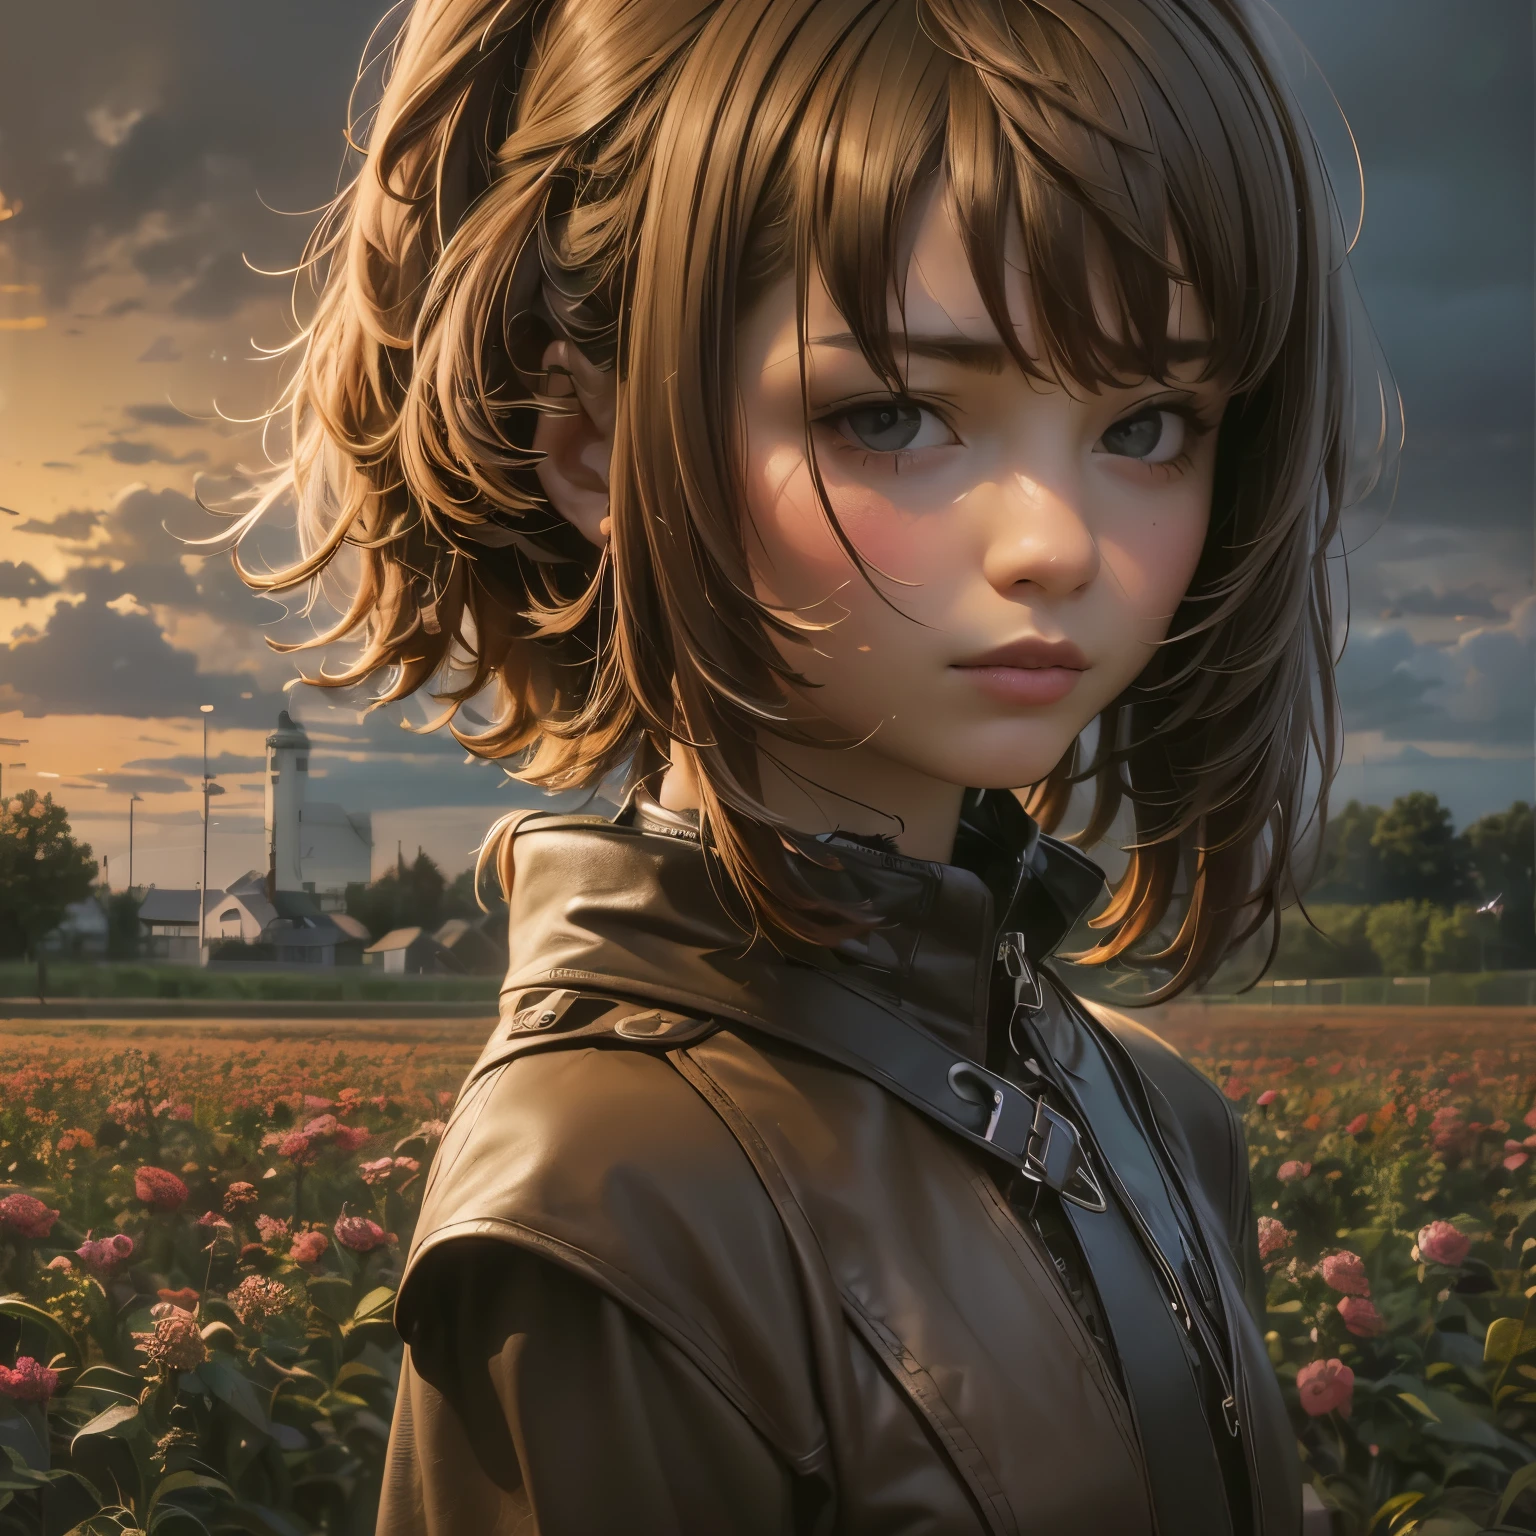 (realism: 1.3), Big, quality, Rembrandt lighting, (masterpiece: 1.2), (realism: 1.2), (Best quality), (leather details: 1.3), (the hard part), dramatic, Idyllic, ray tracing, 1 girl, Chinese yellow girl, Long black hair, 24 years, modern clothes, Sun, Clouds, fields, farms, star Light, Trails)  